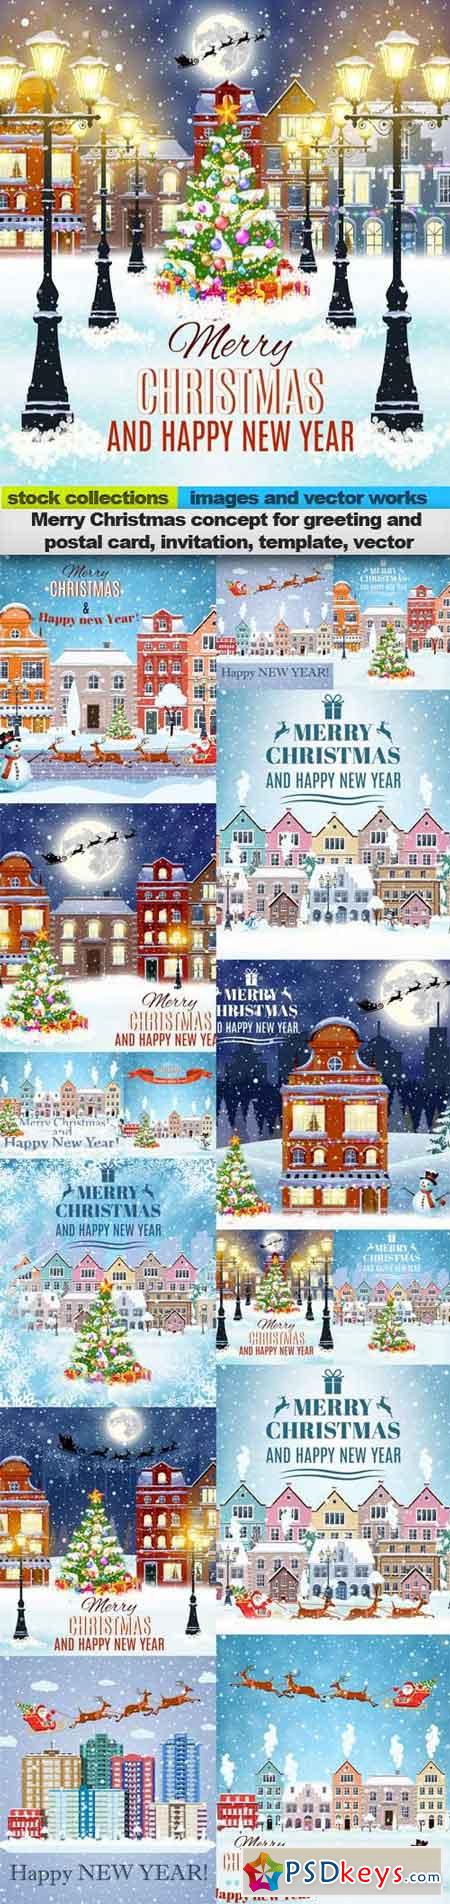 Merry Christmas concept for greeting and postal card, invitation, template, vector illustration, 15 x EPS